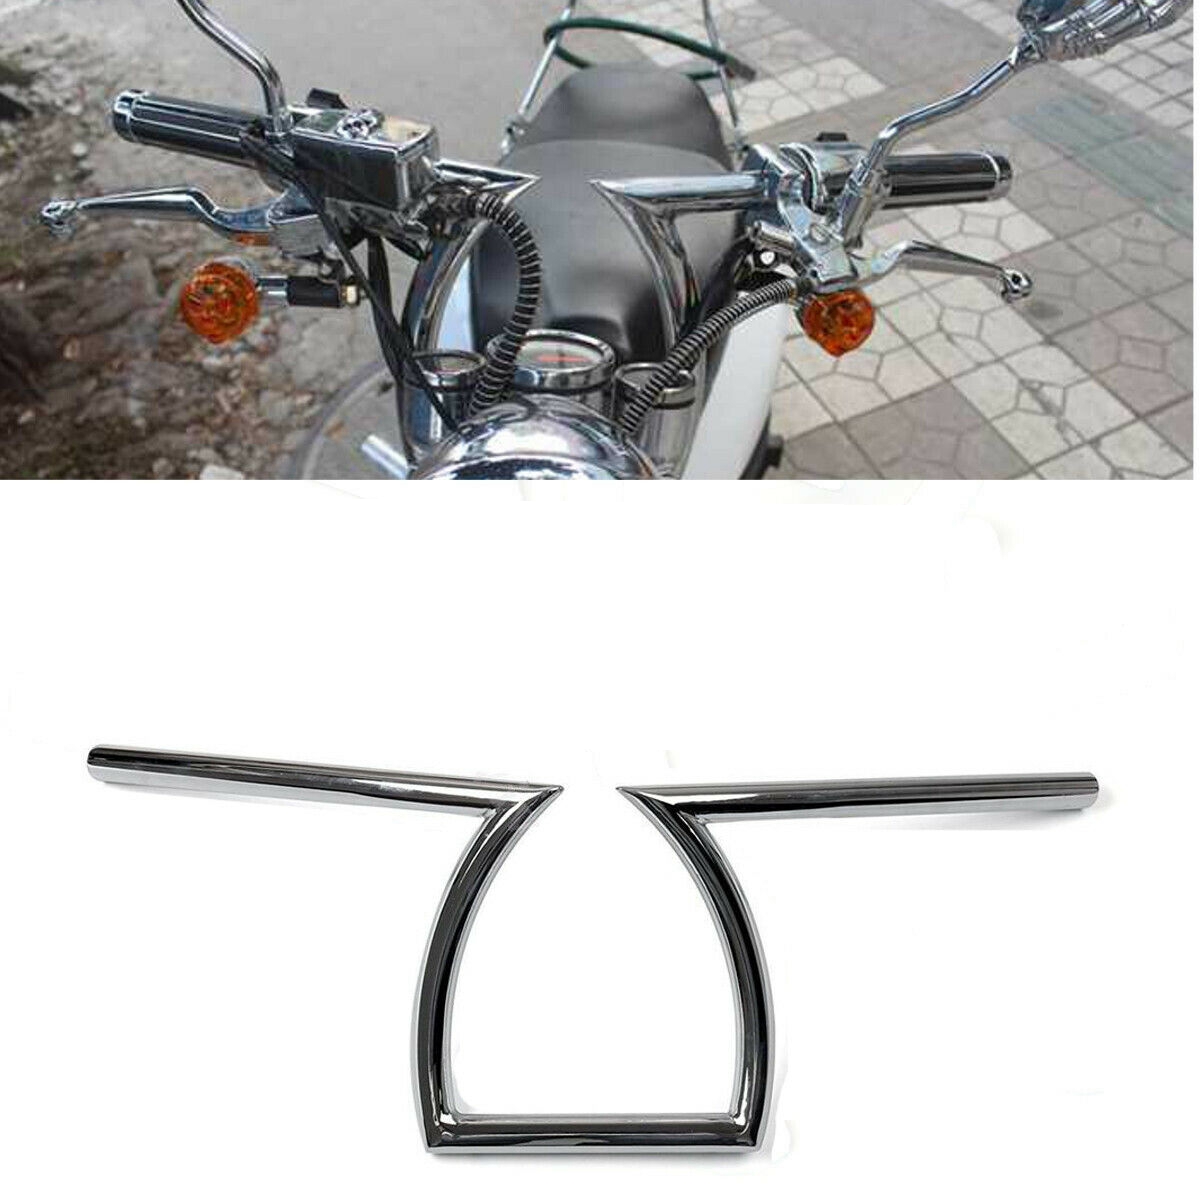 Wholesale 22mm 7/8 inches 25mm 1inch Motorcycle Drag Handlebars Z Bars 8-3/4" Plating From China